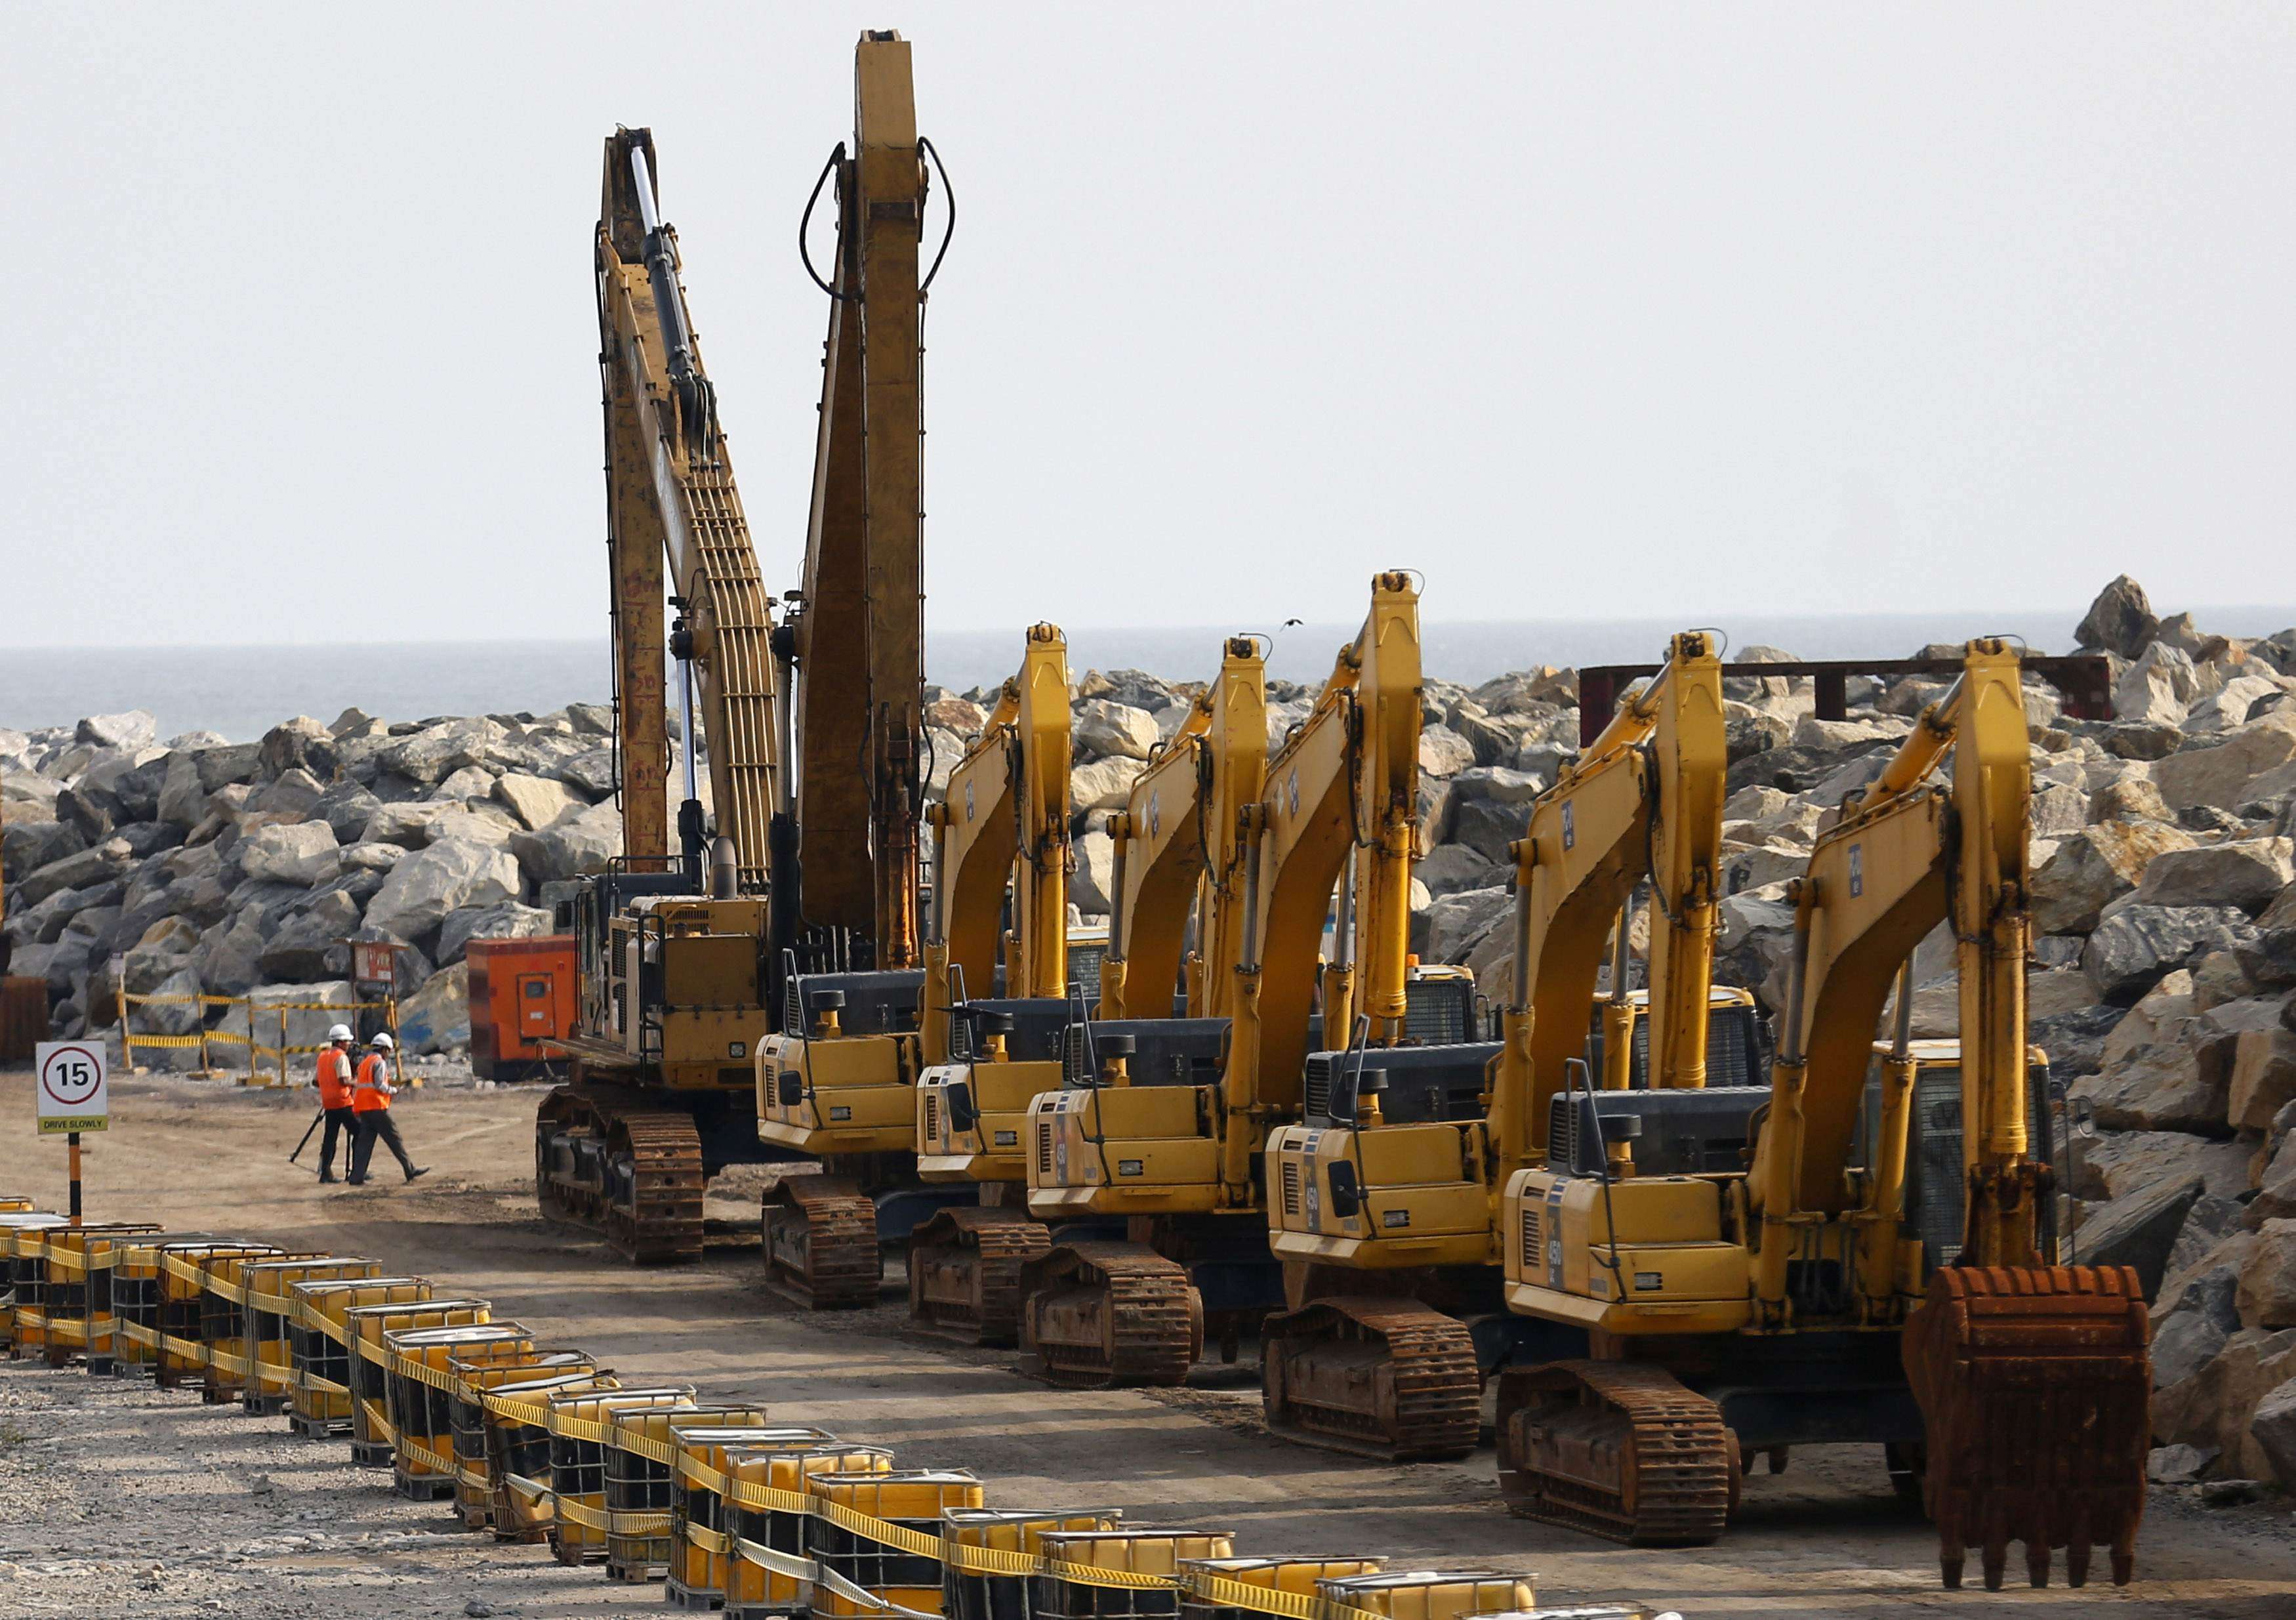 Excavators stand idle after work stopped at the construction site of China-backed Colombo Port City in Colombo, Sri Lanka. Relations between the two countries cooled after a change in government in Sri Lanka. Photo: Reuters